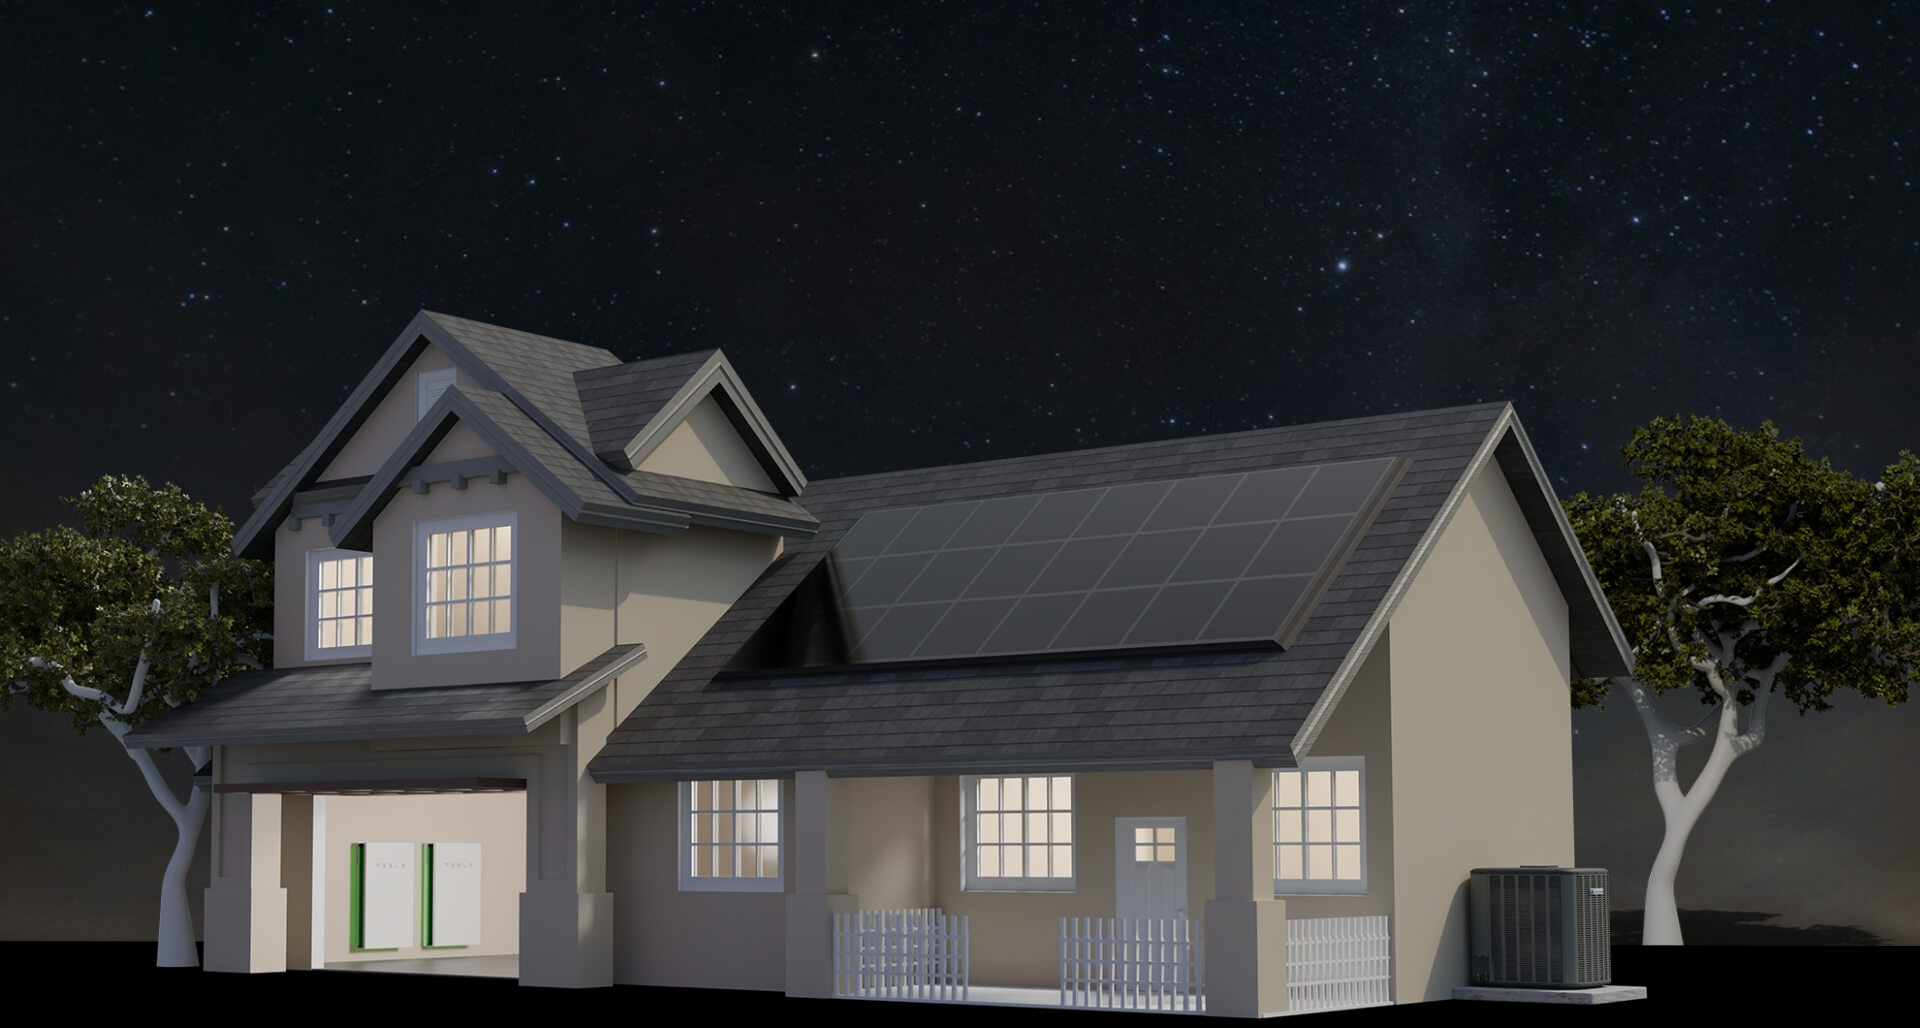 Full self sufficient home with Solar panels, battery storage, cool roof technology, and high efficient HVAC system.